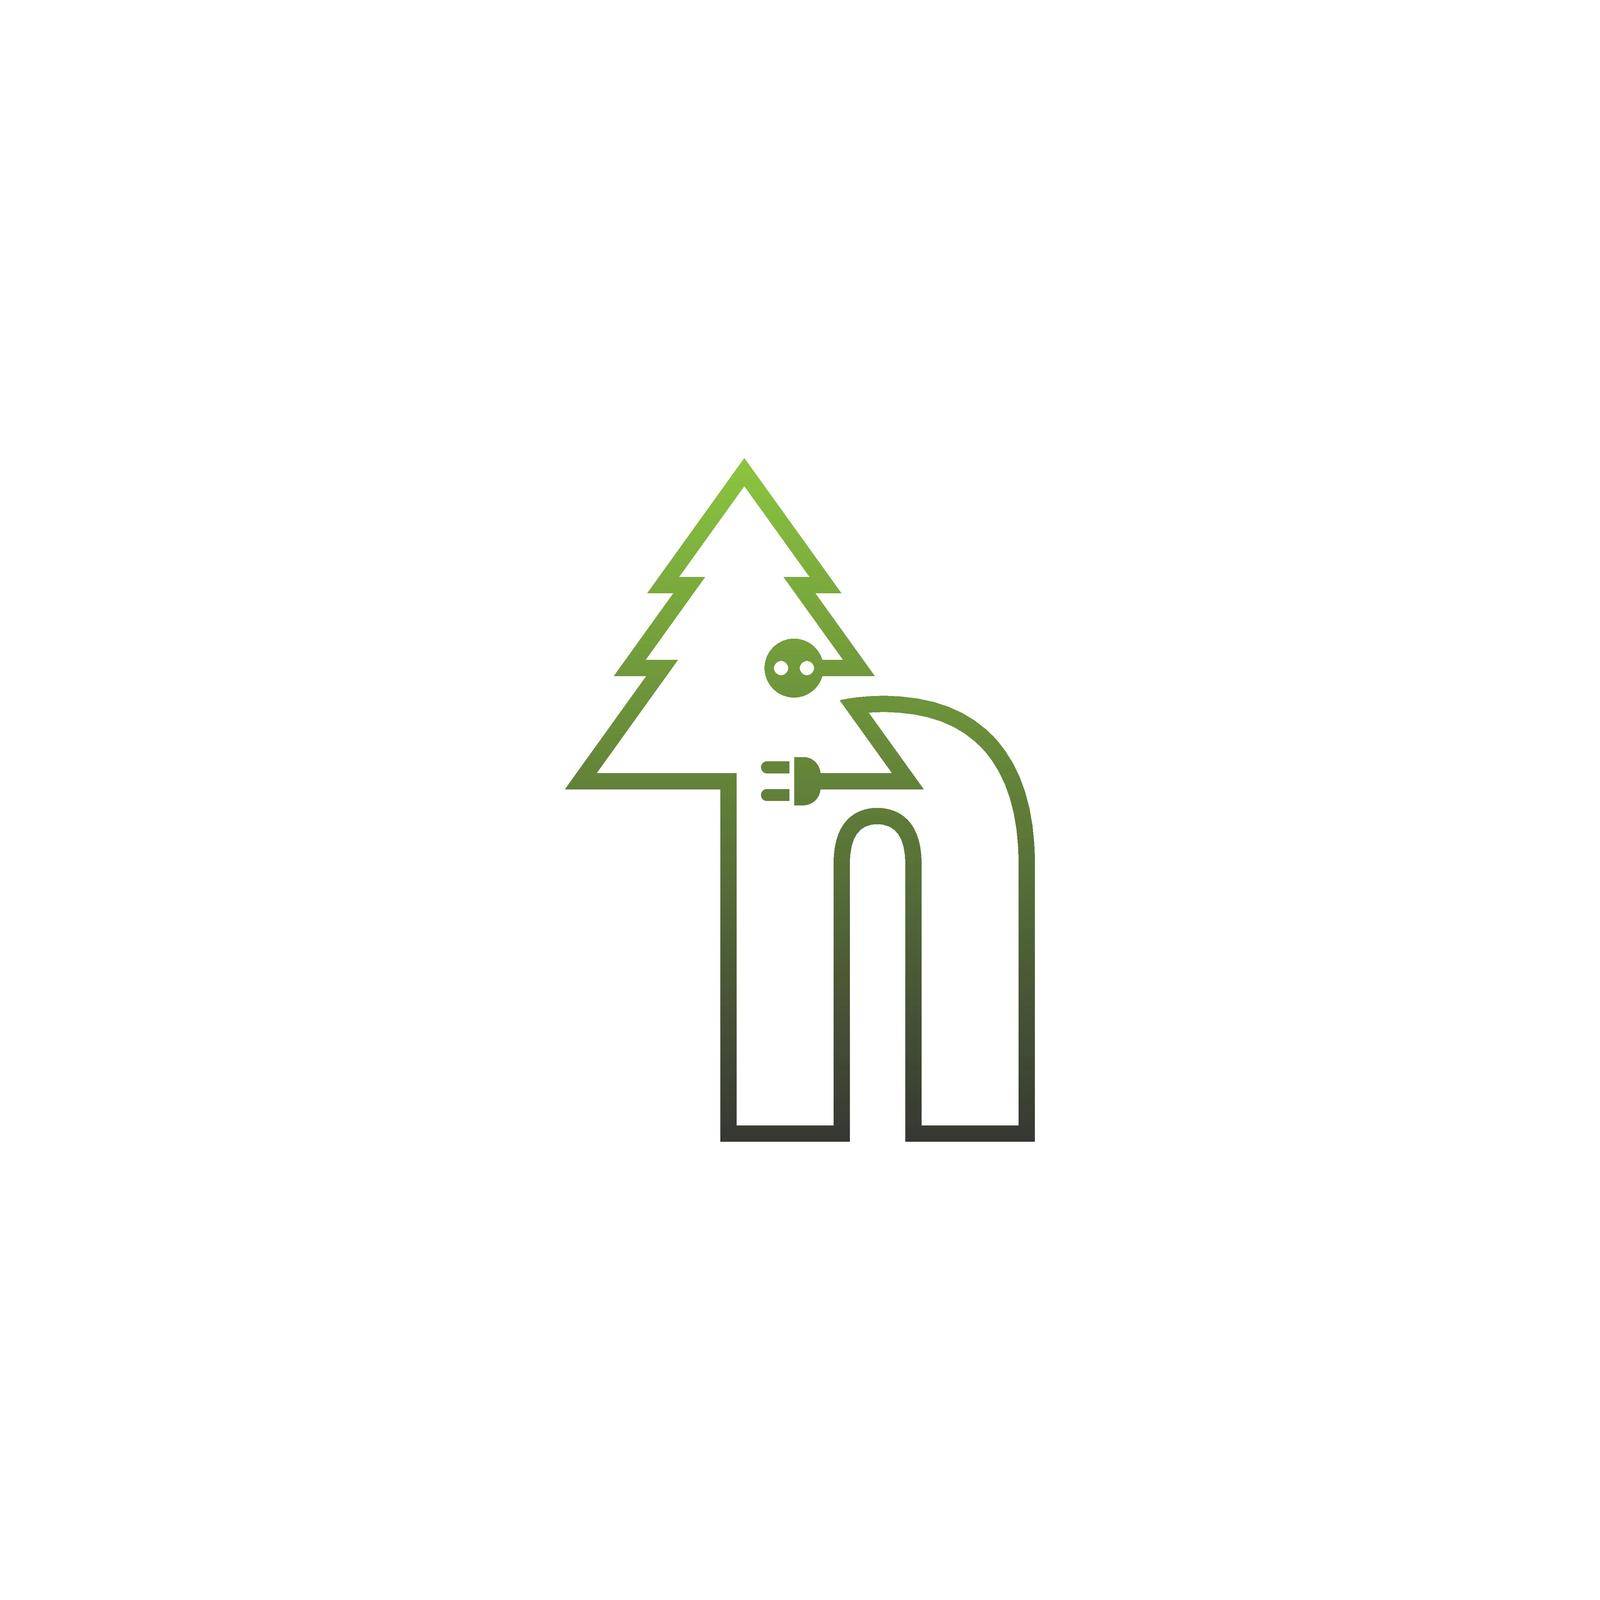 Letter tree Logo, Concept Letter + icon tree vector by bellaxbudhong3